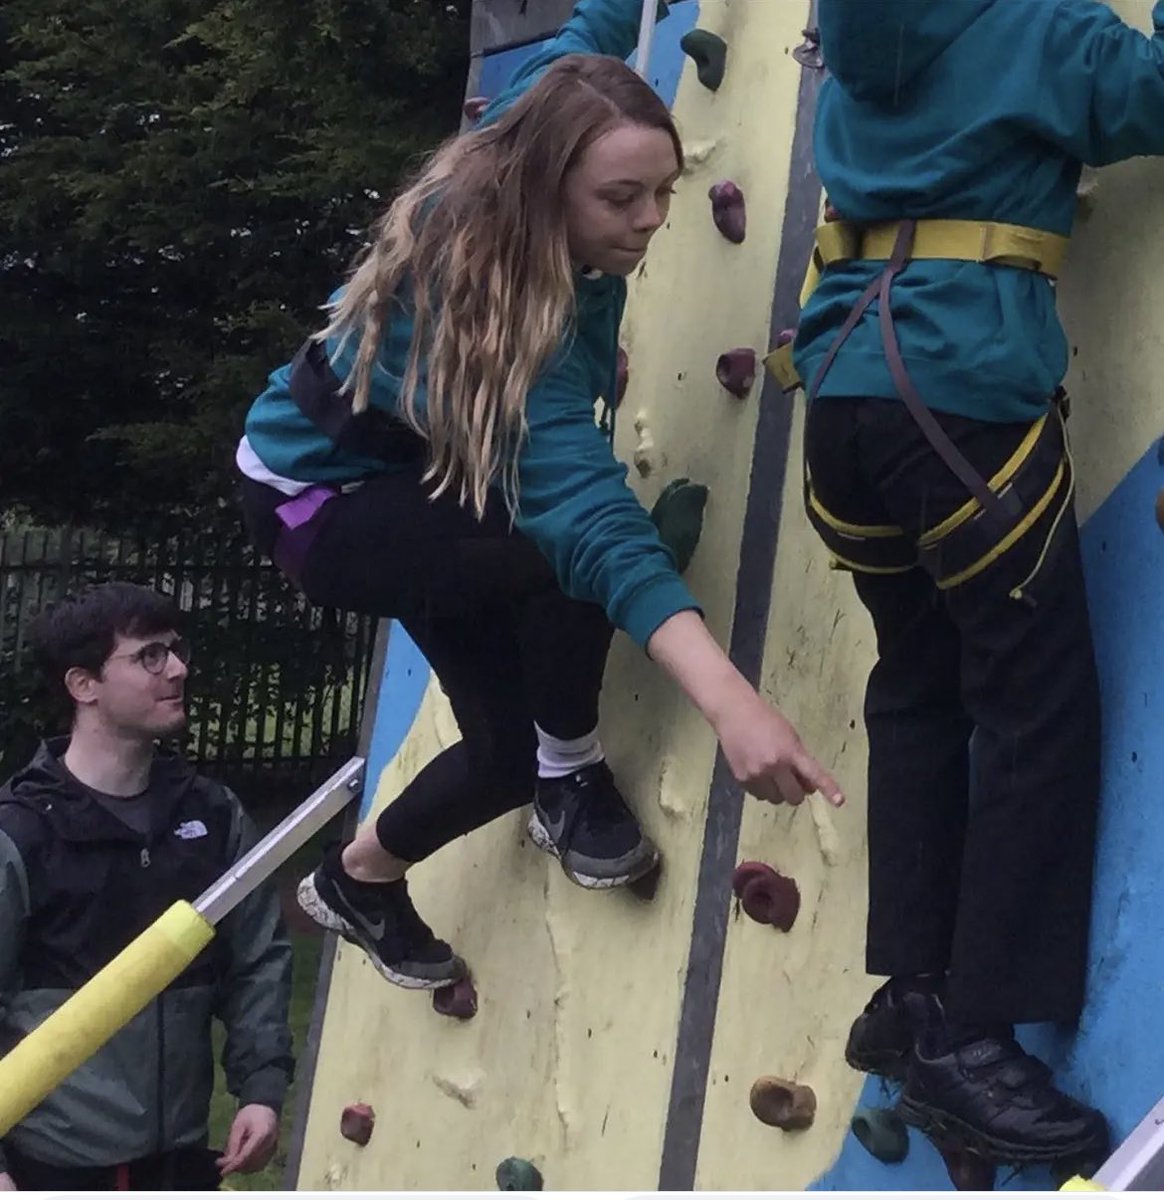 Climbing wall at Heartwood today! Great sporting challenges for children and staff! #curriculum #sports #climbingwall #adventure #swaffham #sportsfunding #learningoutsidetheclassroom 💪🏼💚🌳 @MissKACollins